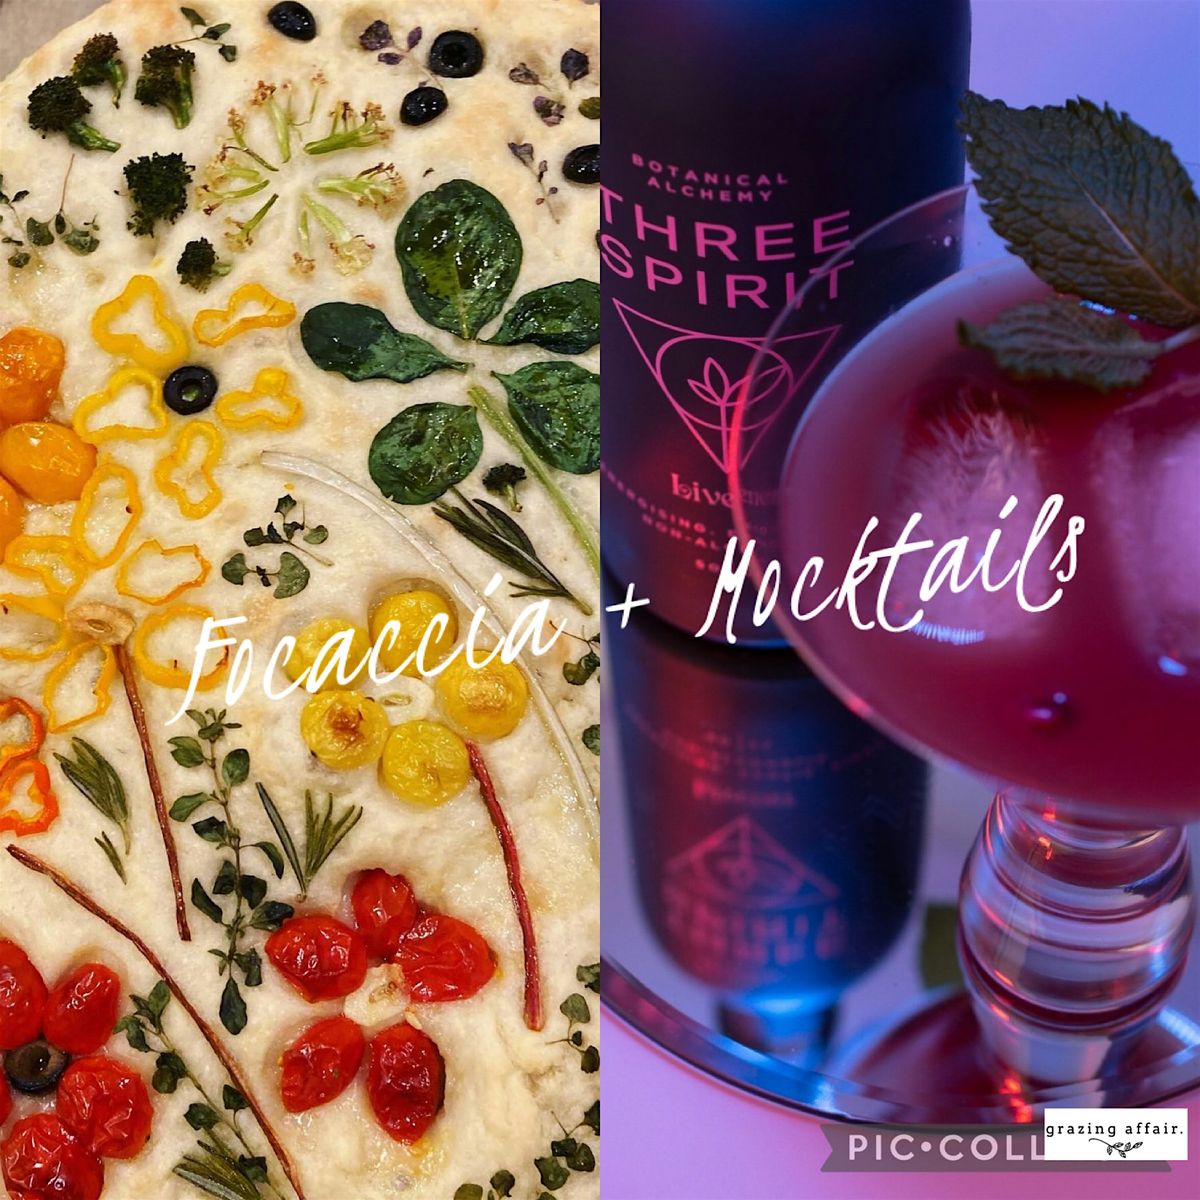 Focaccia Bread + Mocktails with Mystical Blossoms